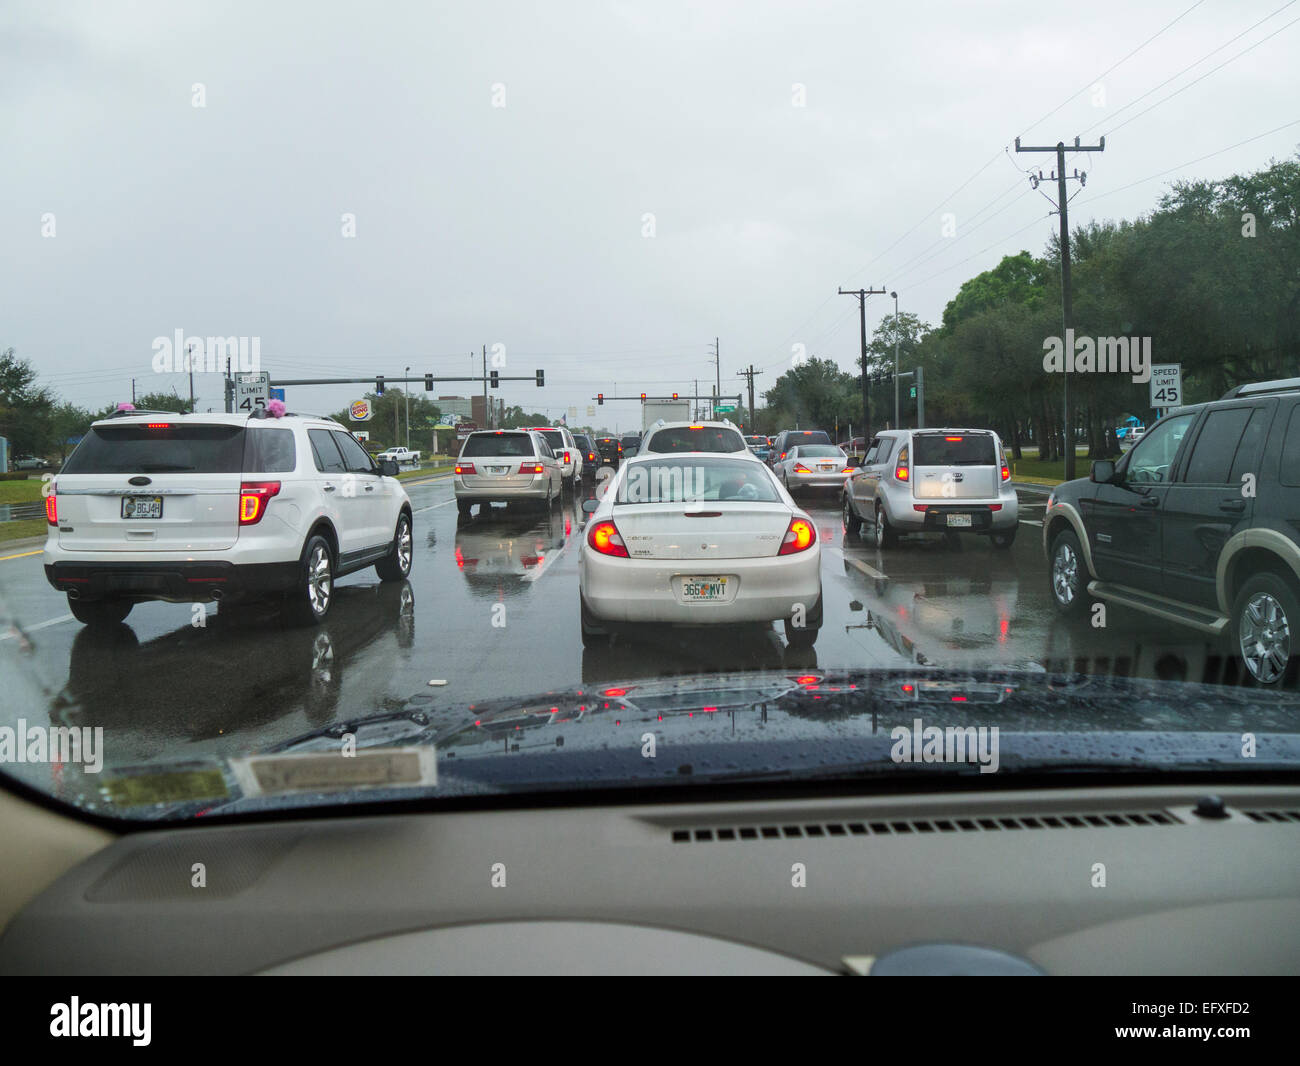 Traffic stopped at traffic light on a rainy overcast day Stock Photo